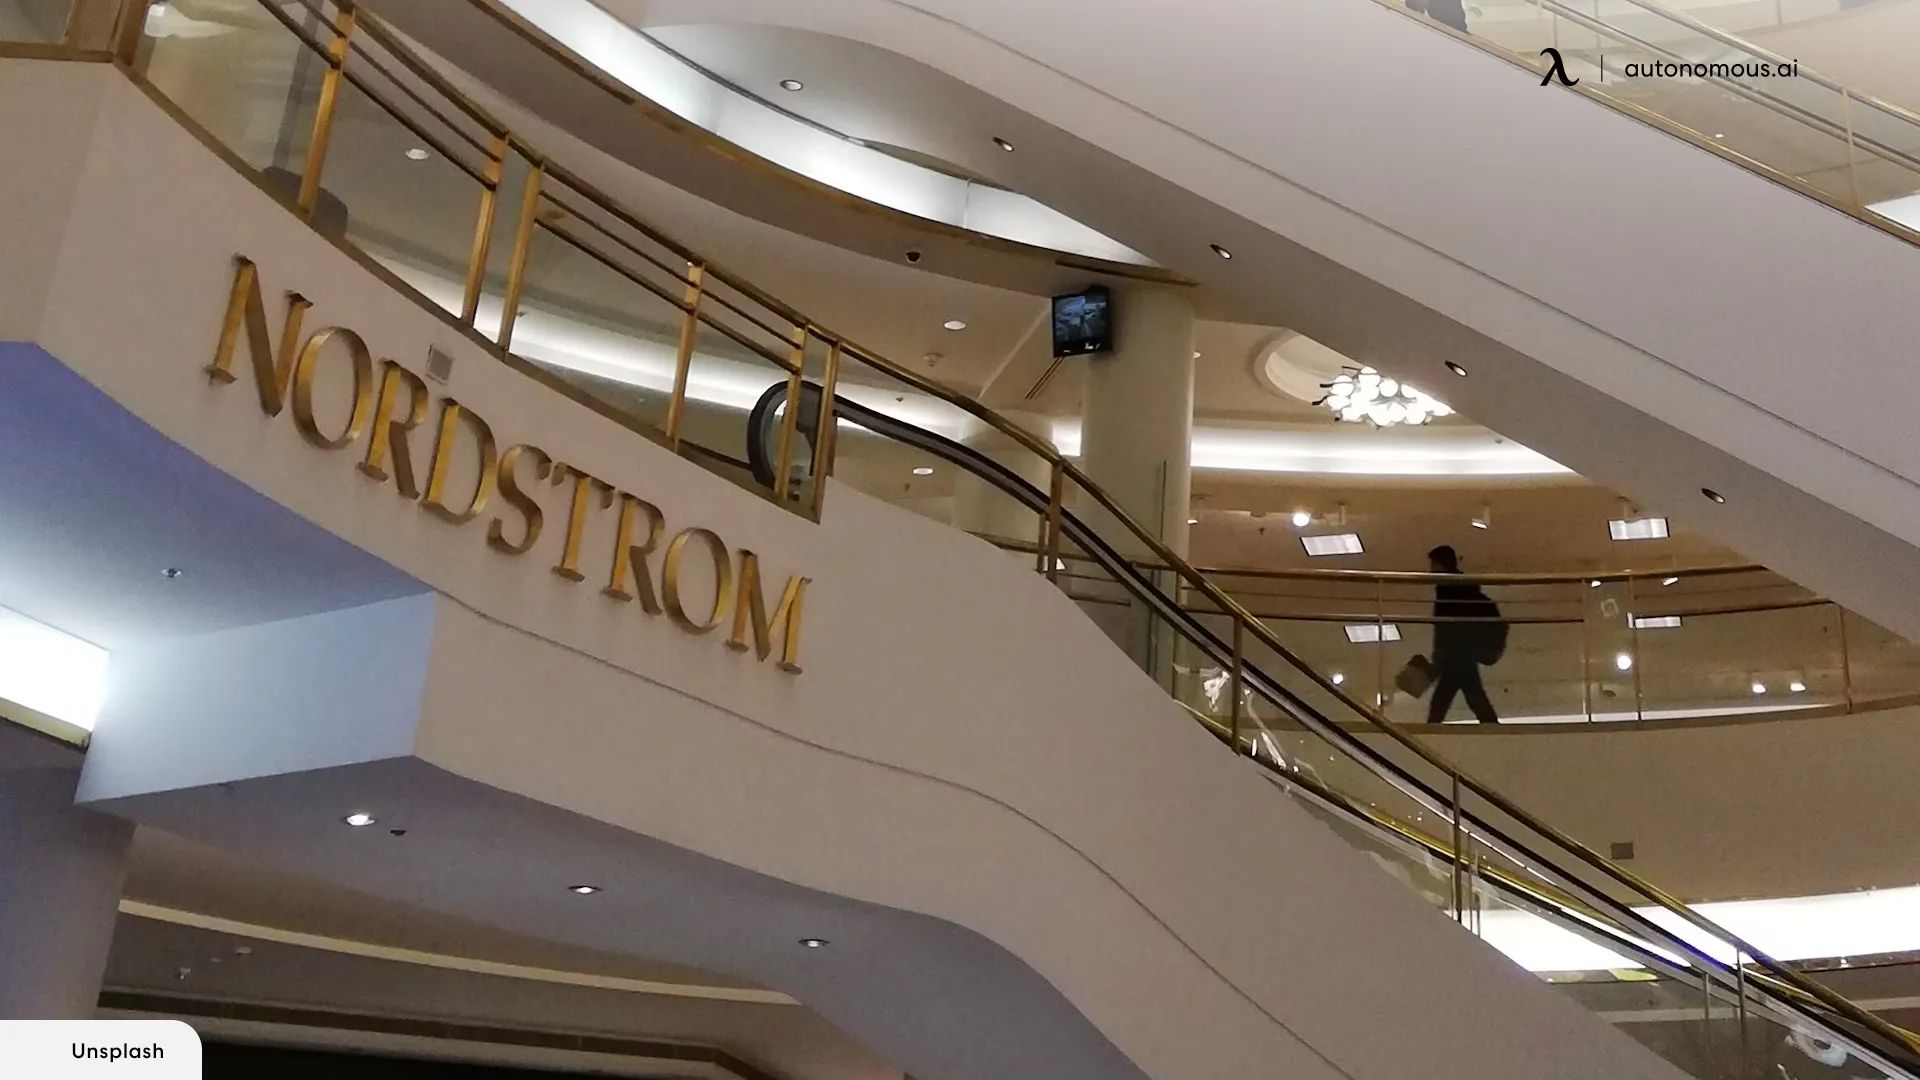 What Is Nordstrom Employee Discount?